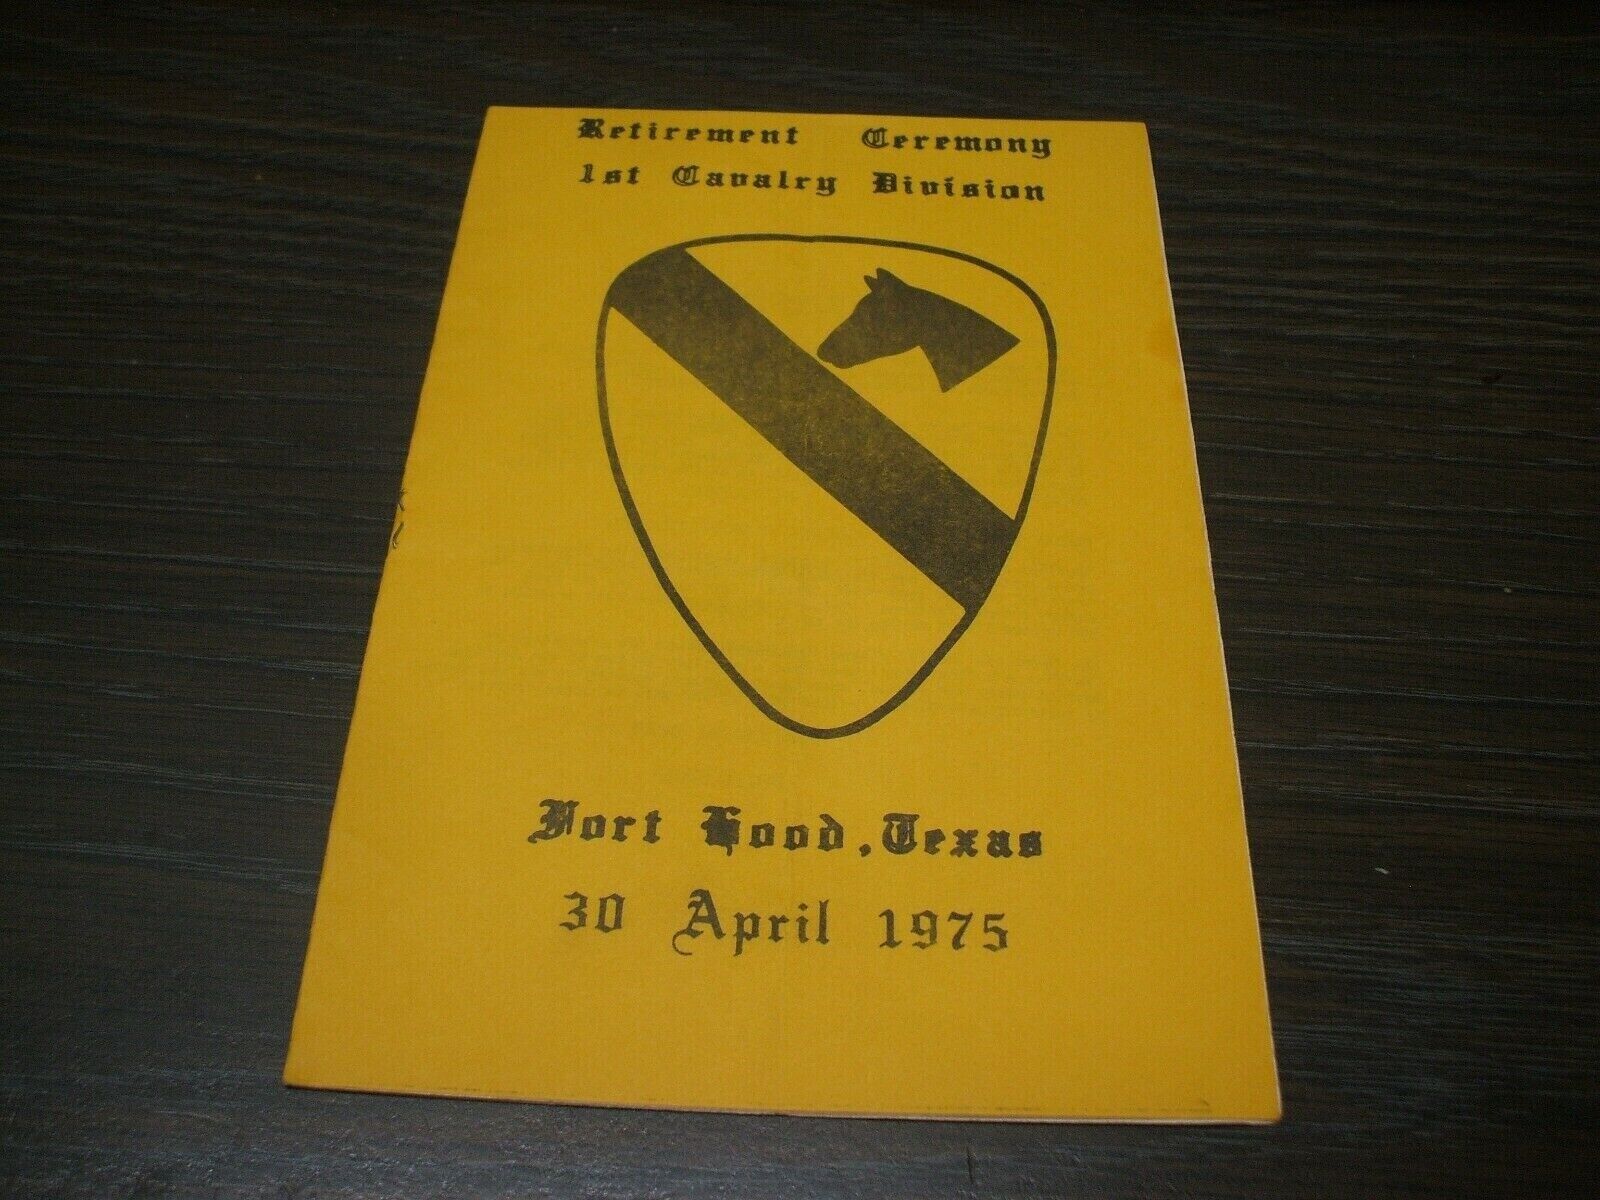 1st CAVALRY DIVISION - FORT HOOD - Retirement Ceremony -  30 April 1975